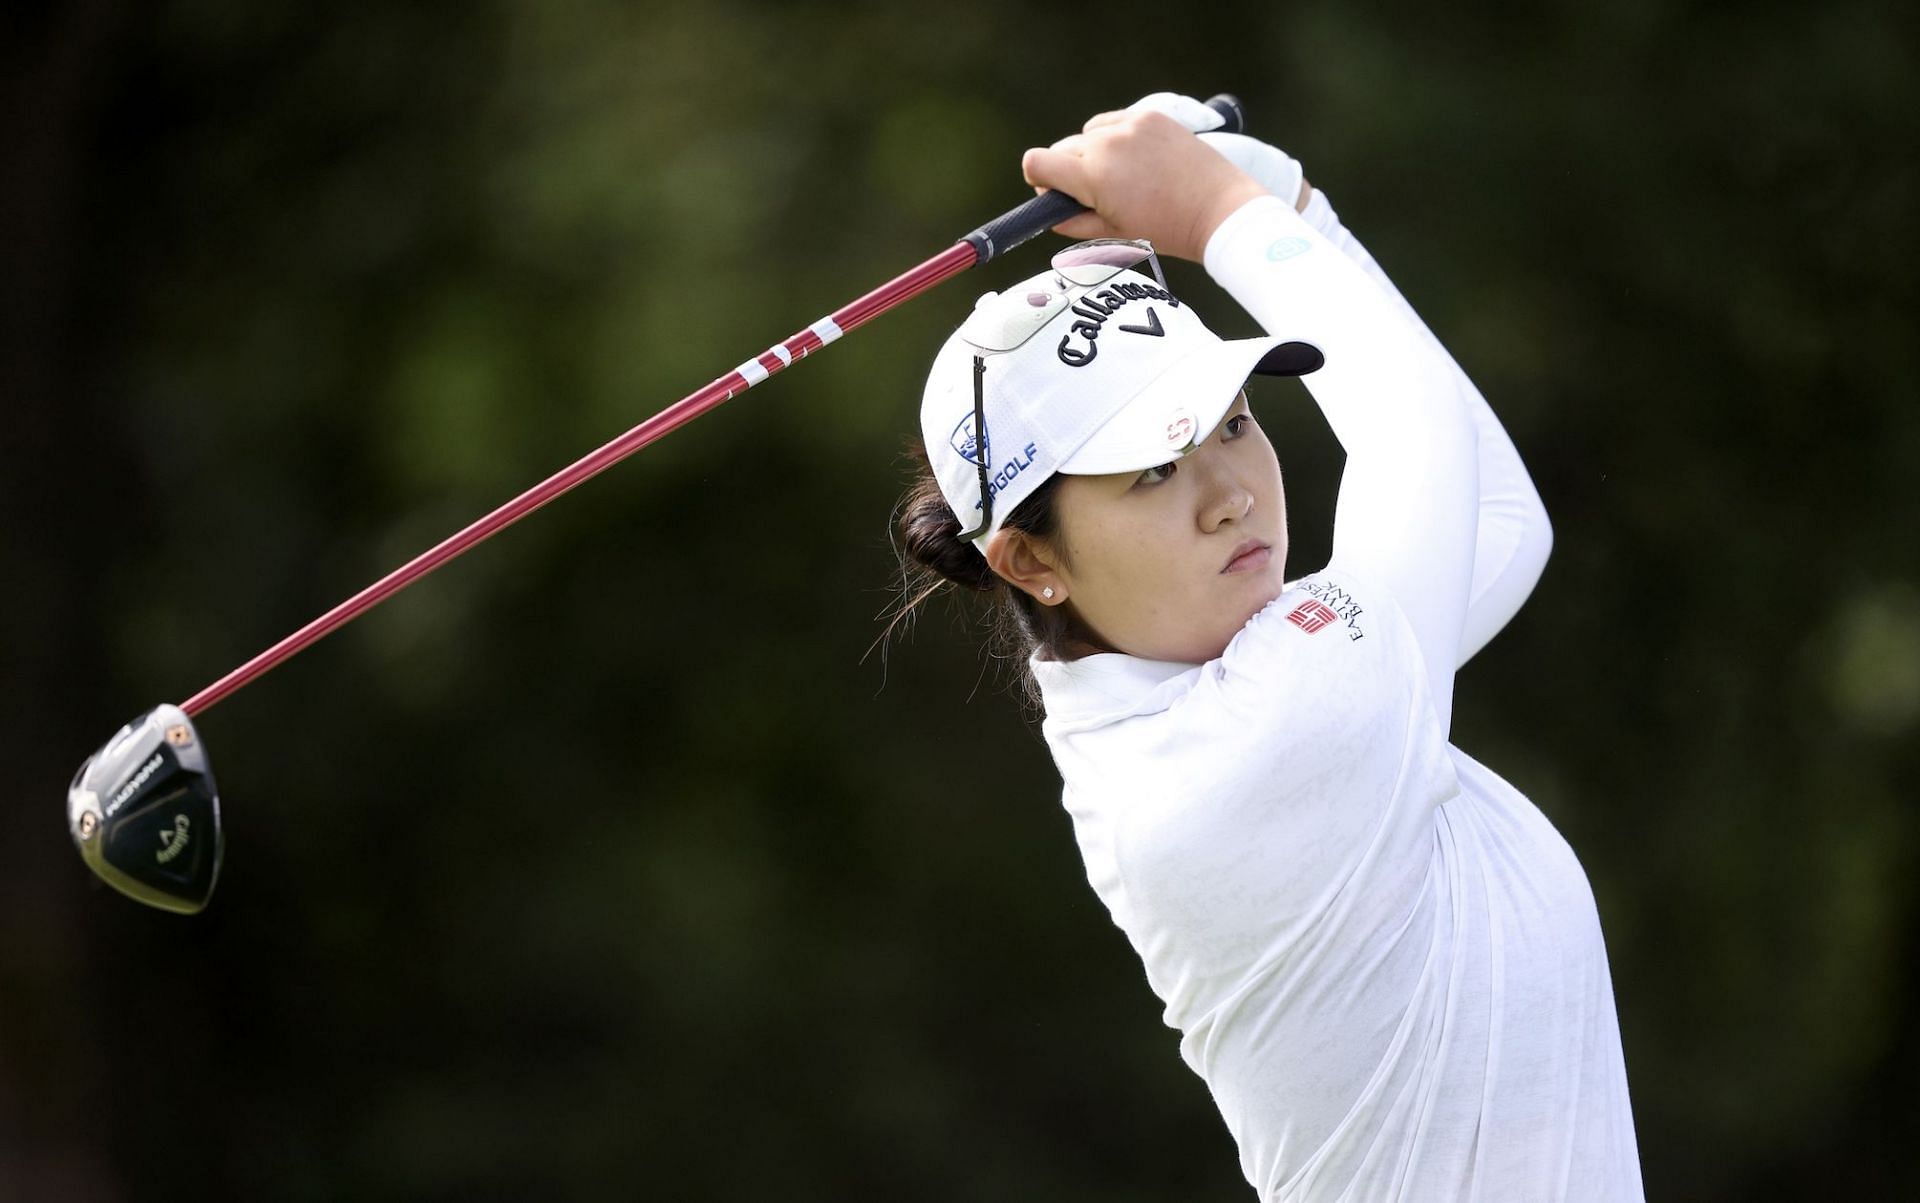 “Being able to play Solheim Cup is truly a dream come true” - Rose ...